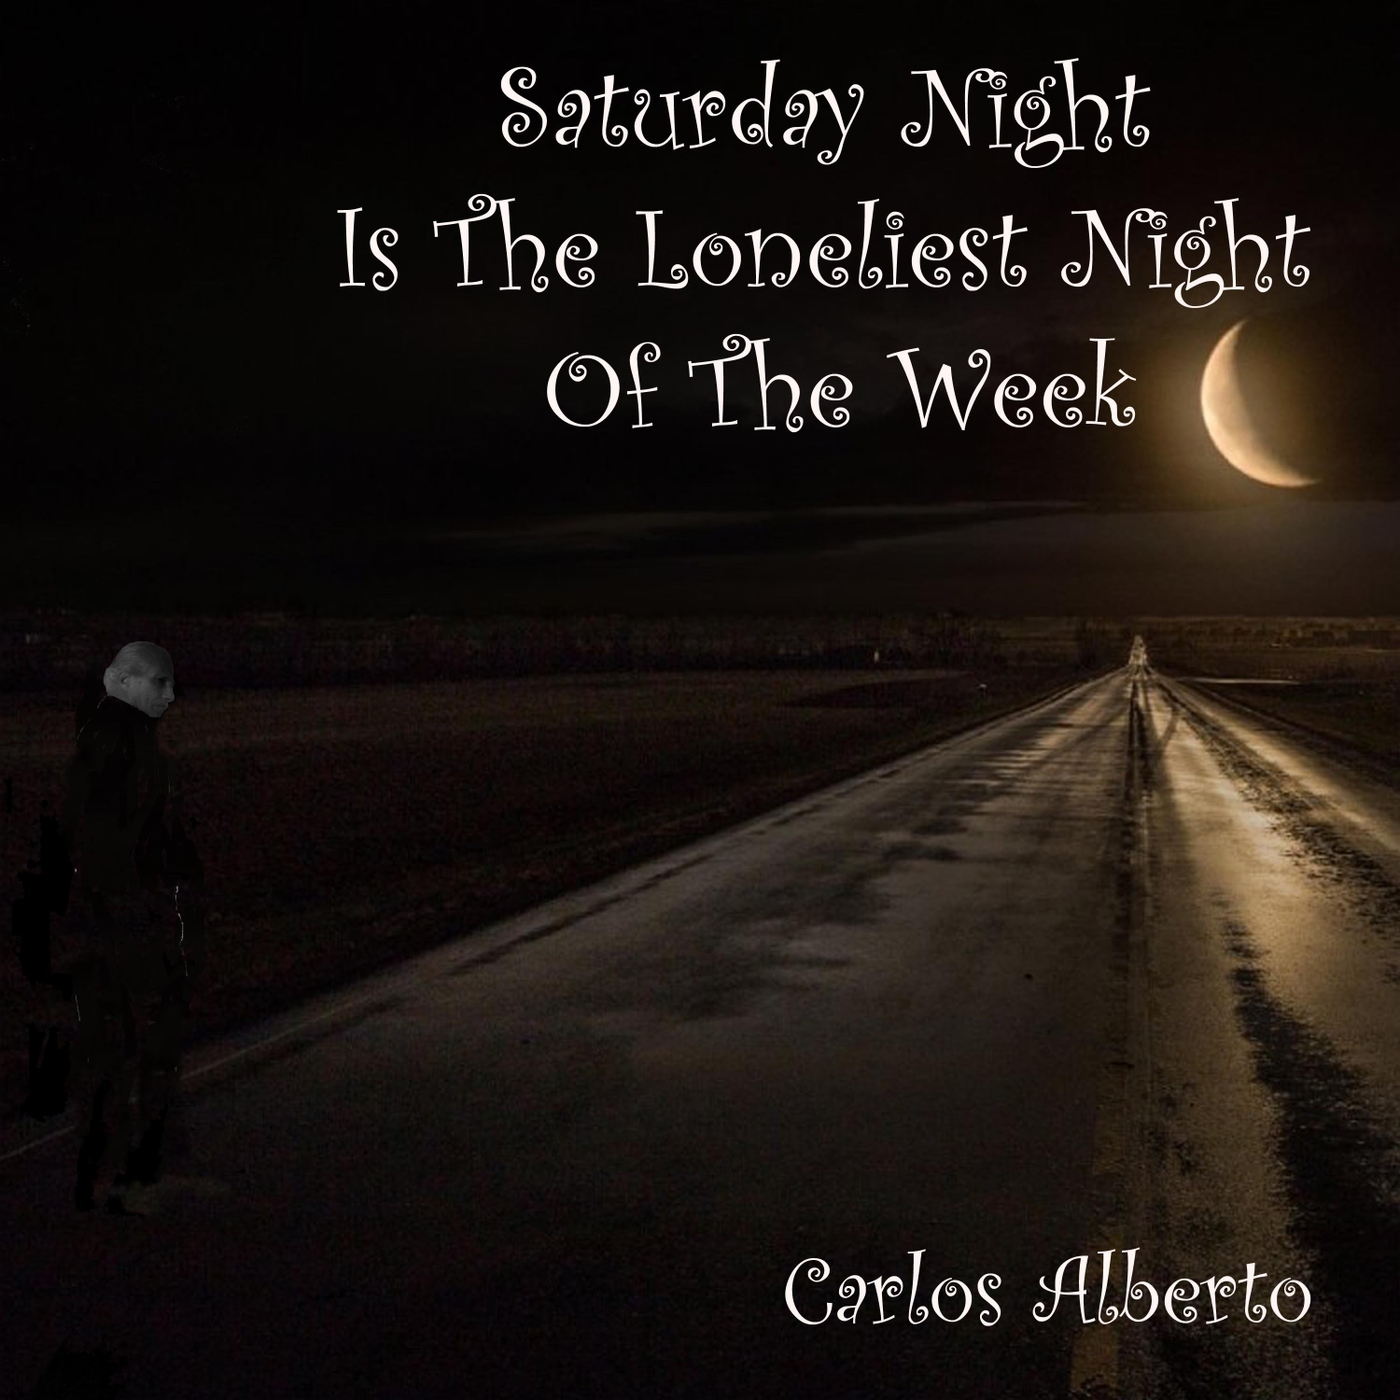 Saturday Night Is the Loneliest Night in the Week